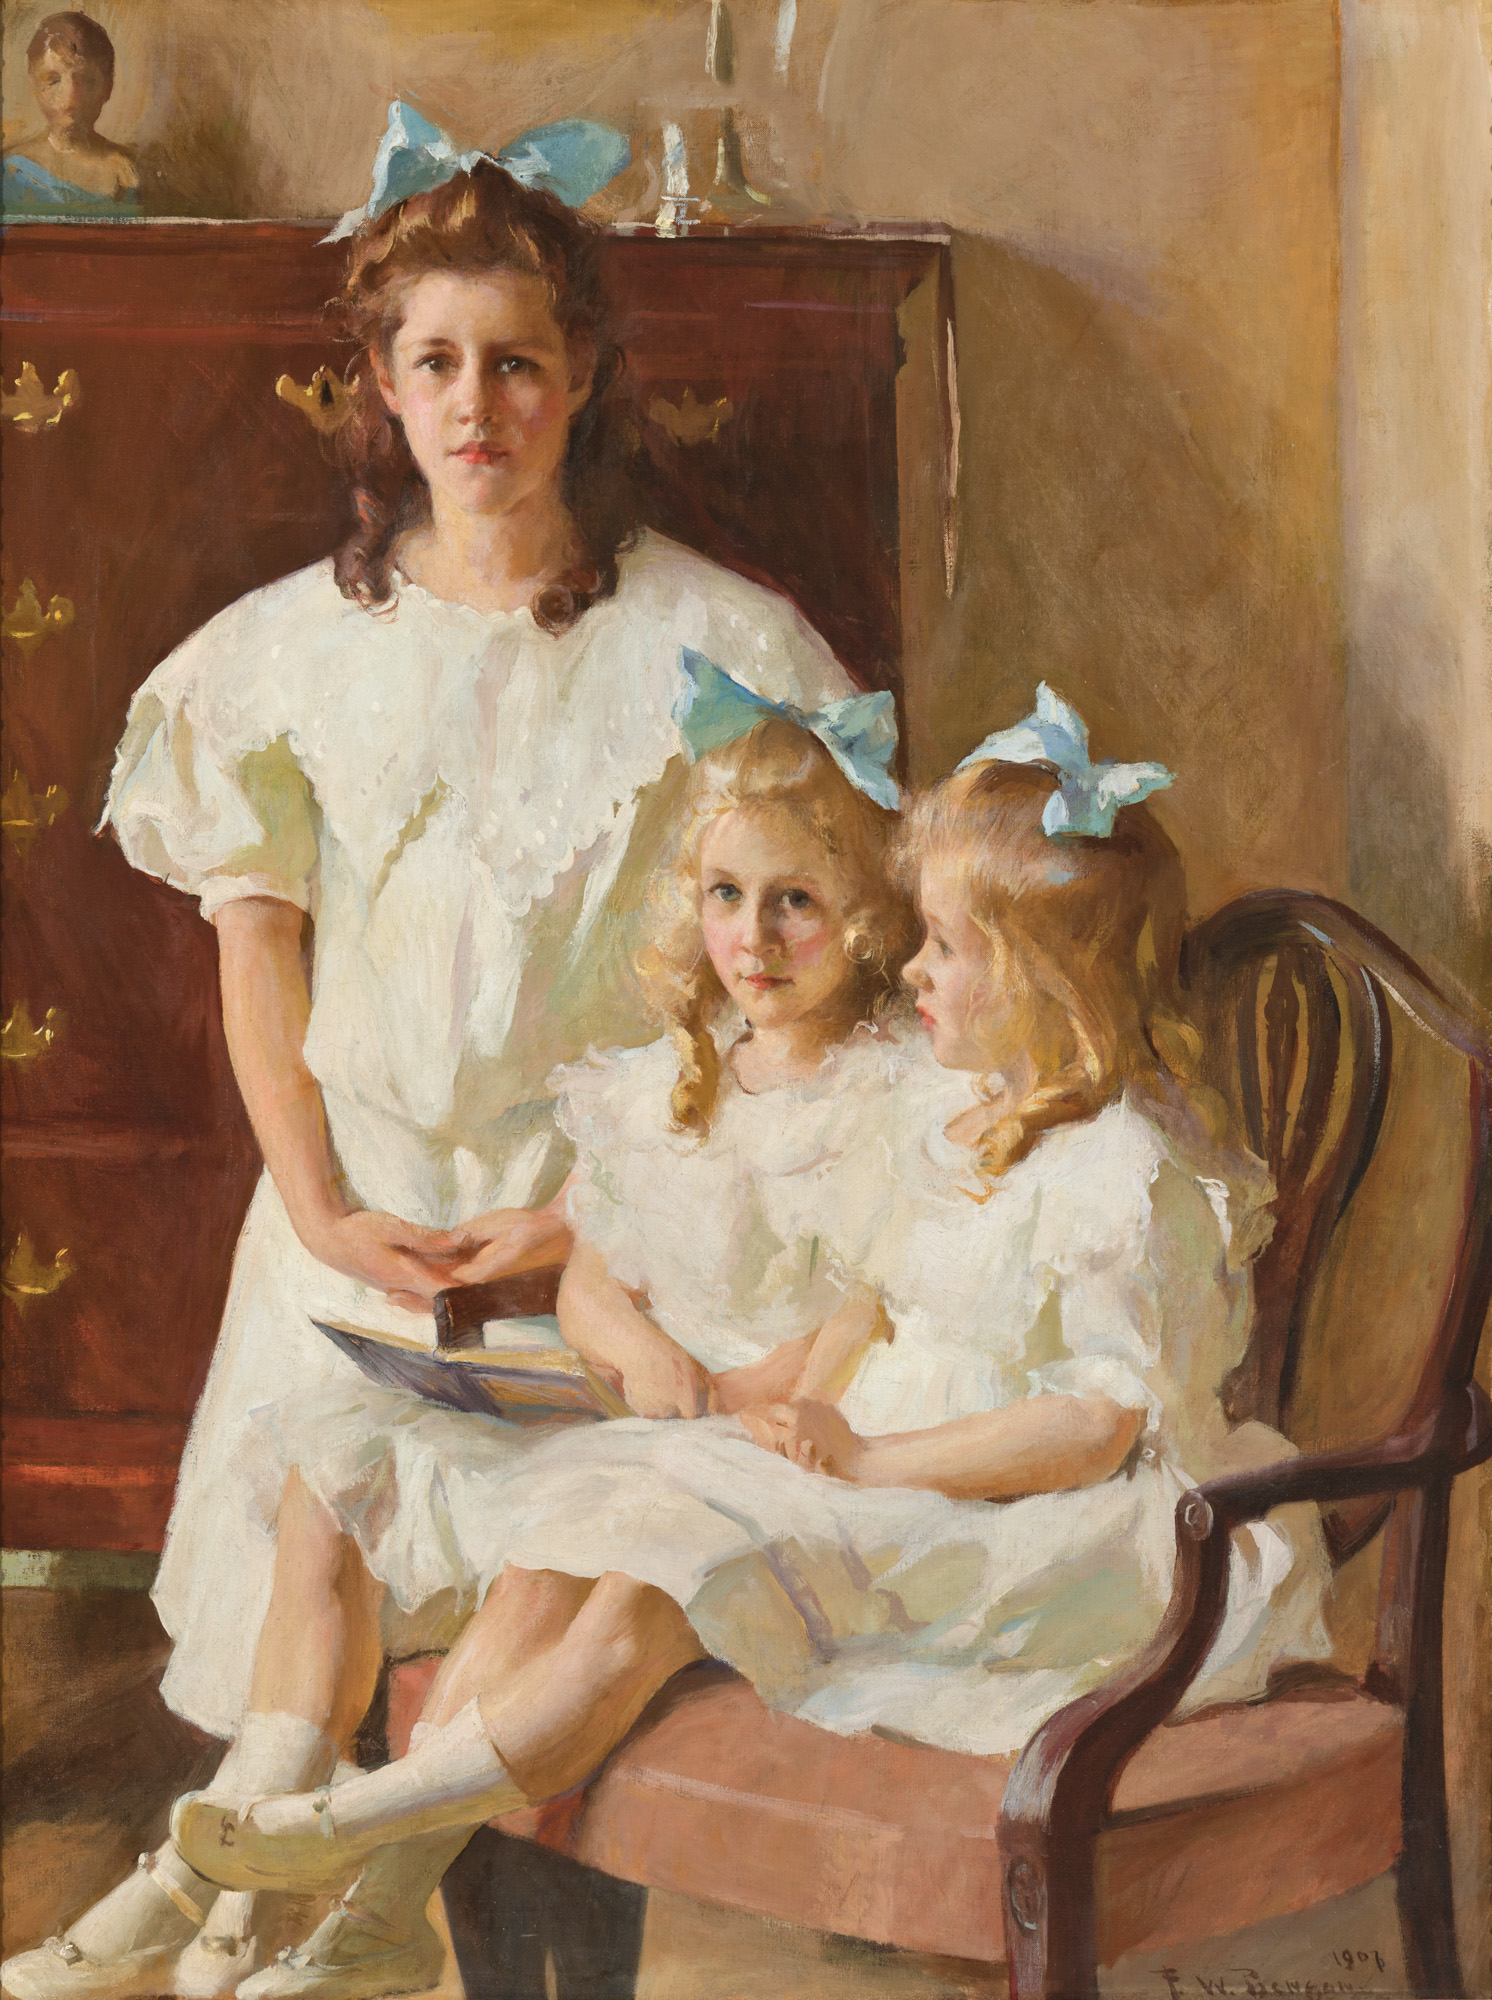 This image depicts three girls sitting. Two of them are blonde twins one of them is older is sitting above them. They are all in white dresses with bows.